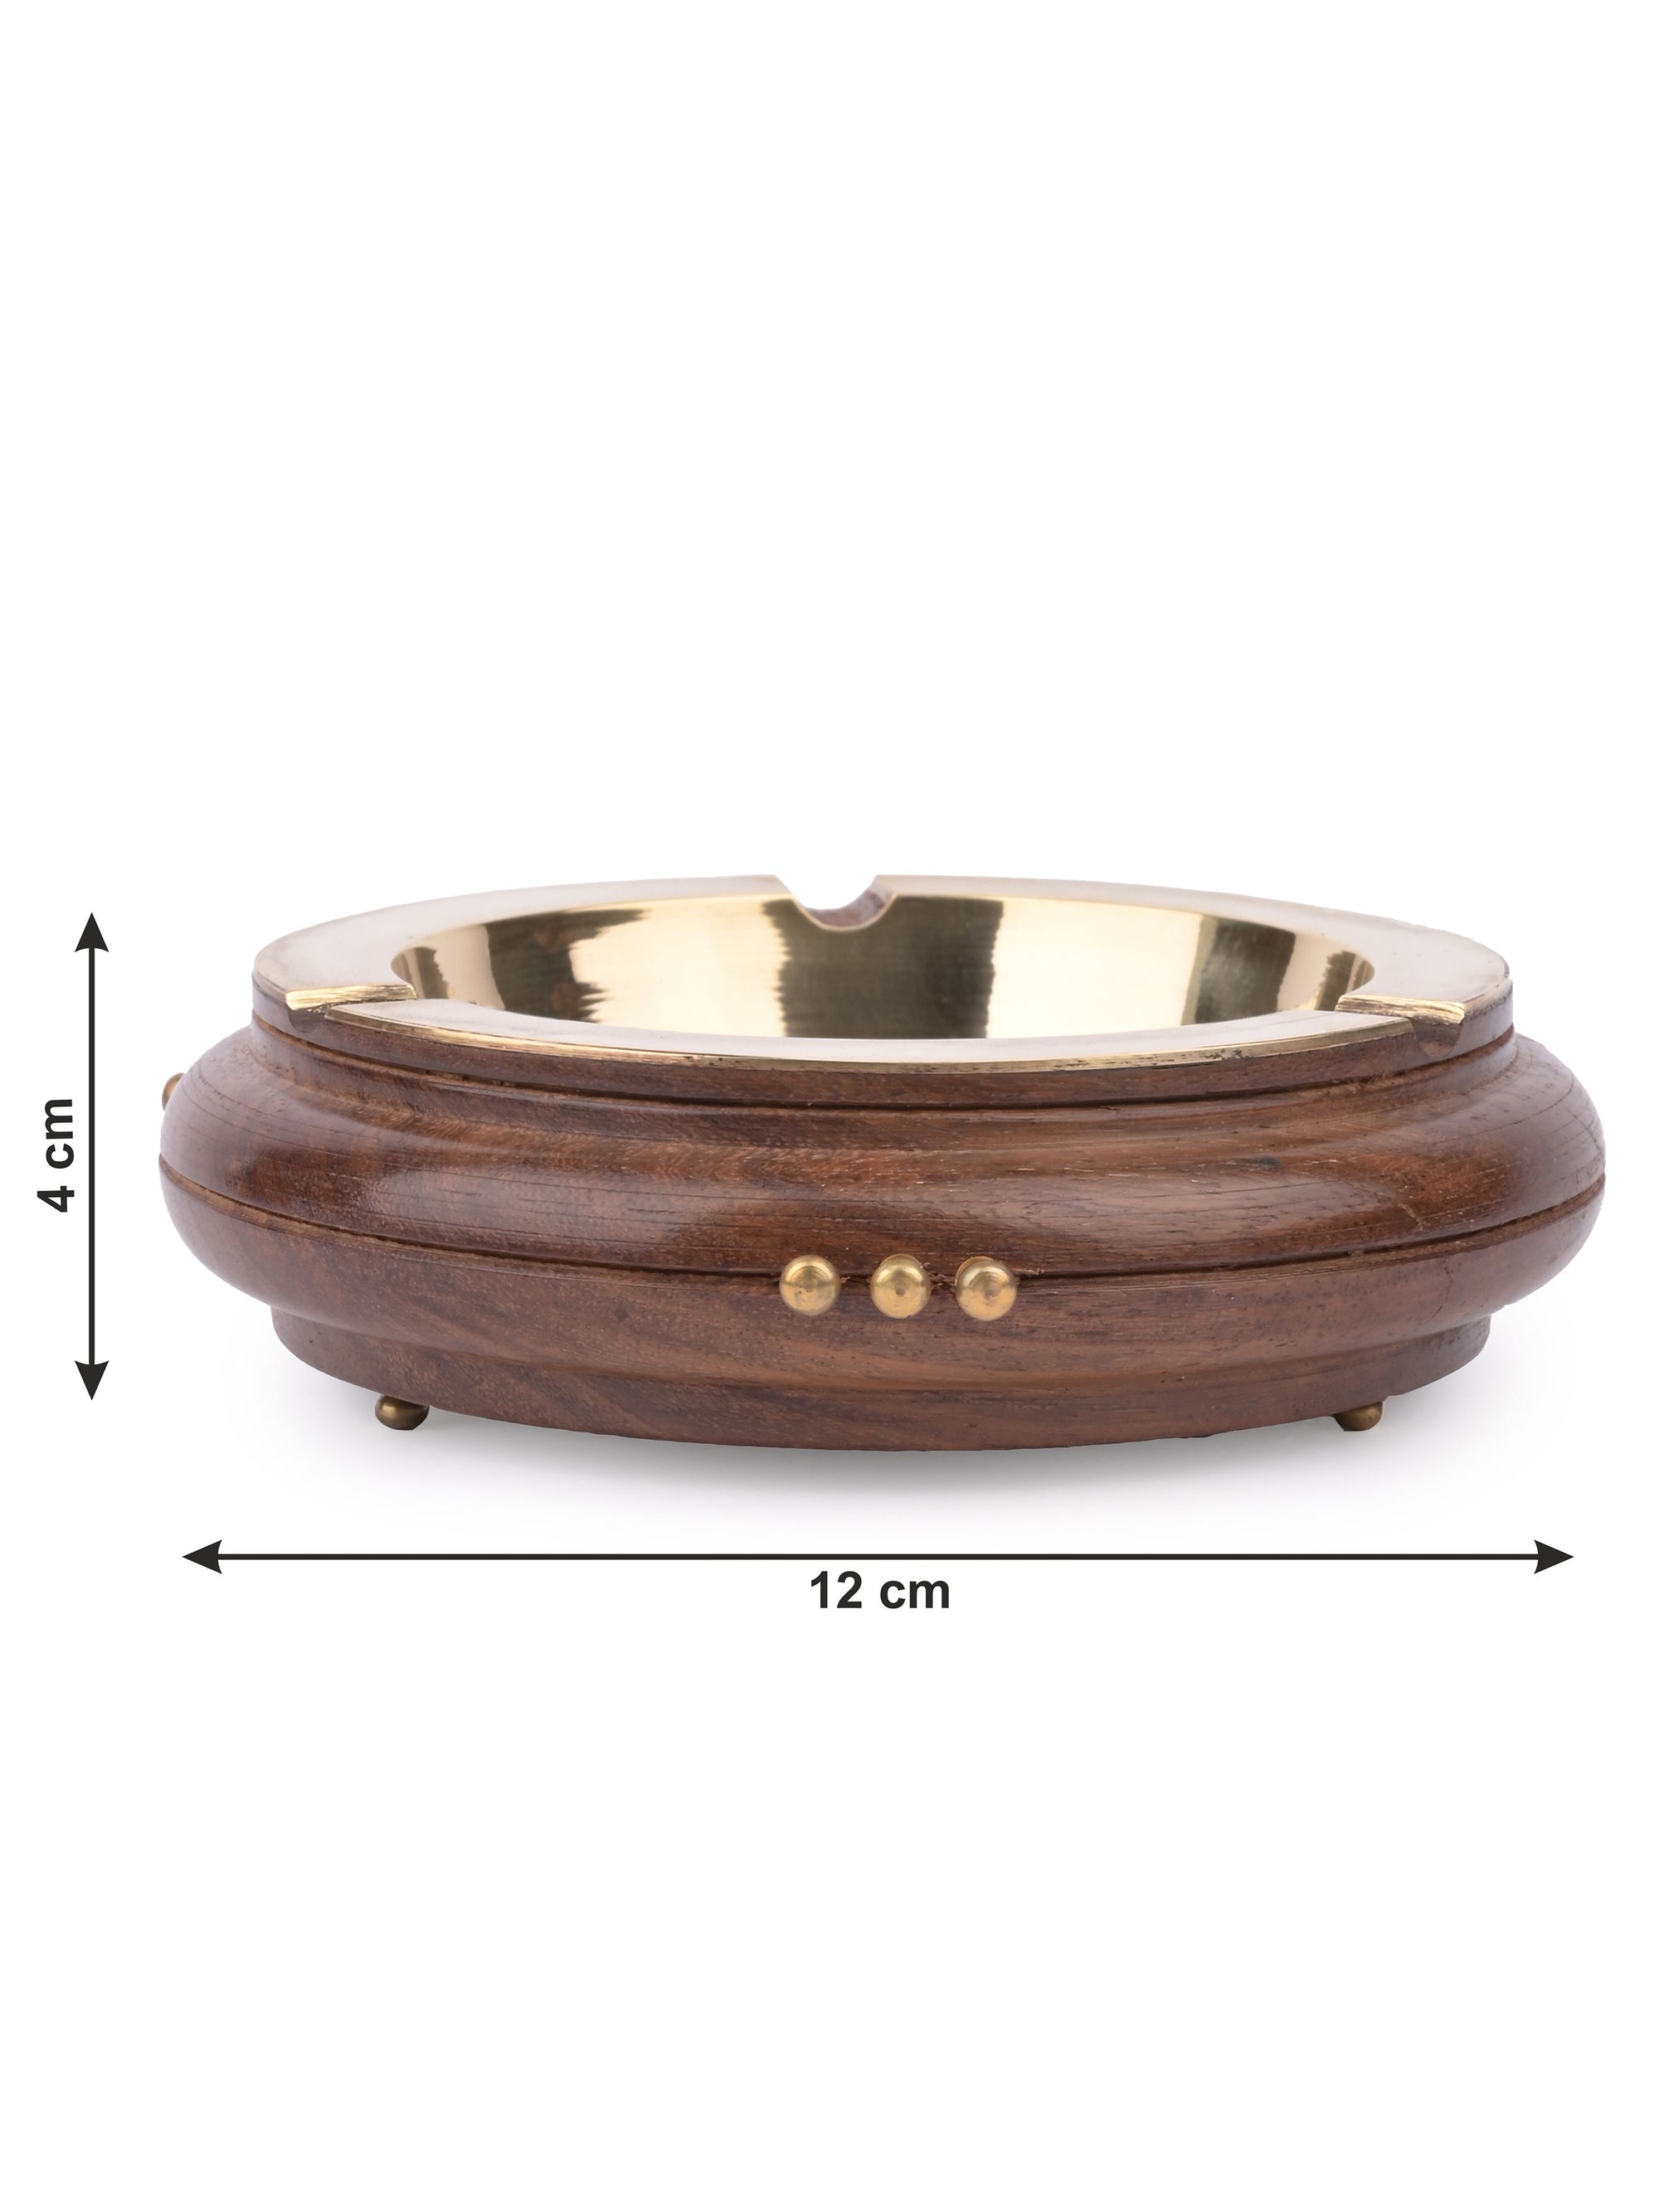 Round Wooden Ashtray with Brass top and a heavy base - The Heritage Artifacts